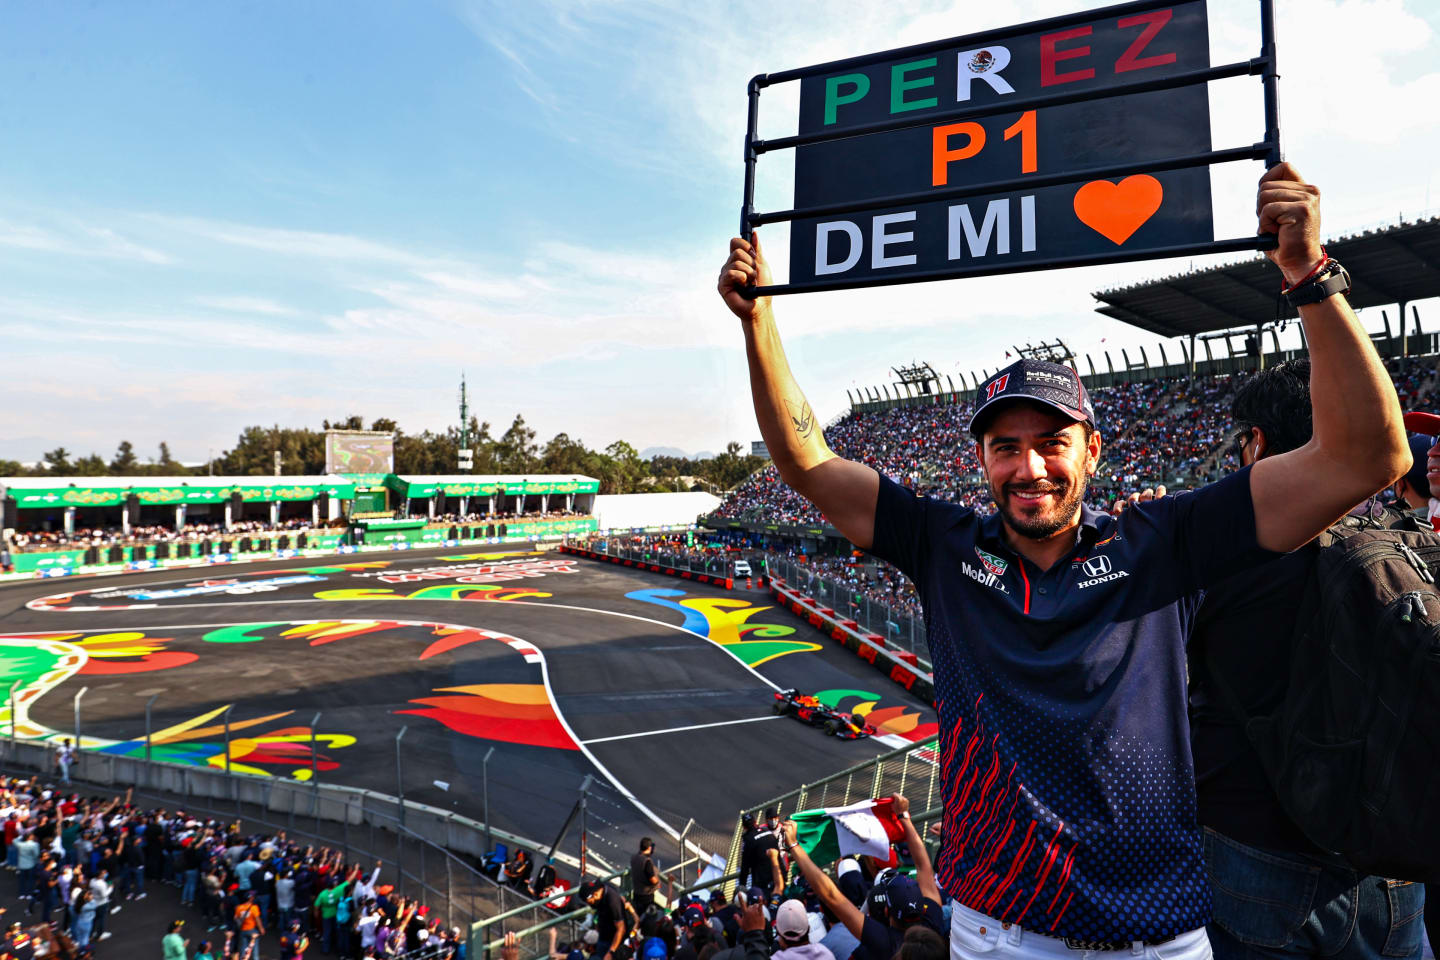 MEXICO CITY, MEXICO - NOVEMBER 05: A Sergio Perez of Mexico and Red Bull Racing fan shows their support in the grandstand during practice ahead of the F1 Grand Prix of Mexico at Autodromo Hermanos Rodriguez on November 05, 2021 in Mexico City, Mexico. (Photo by Mark Thompson/Getty Images)